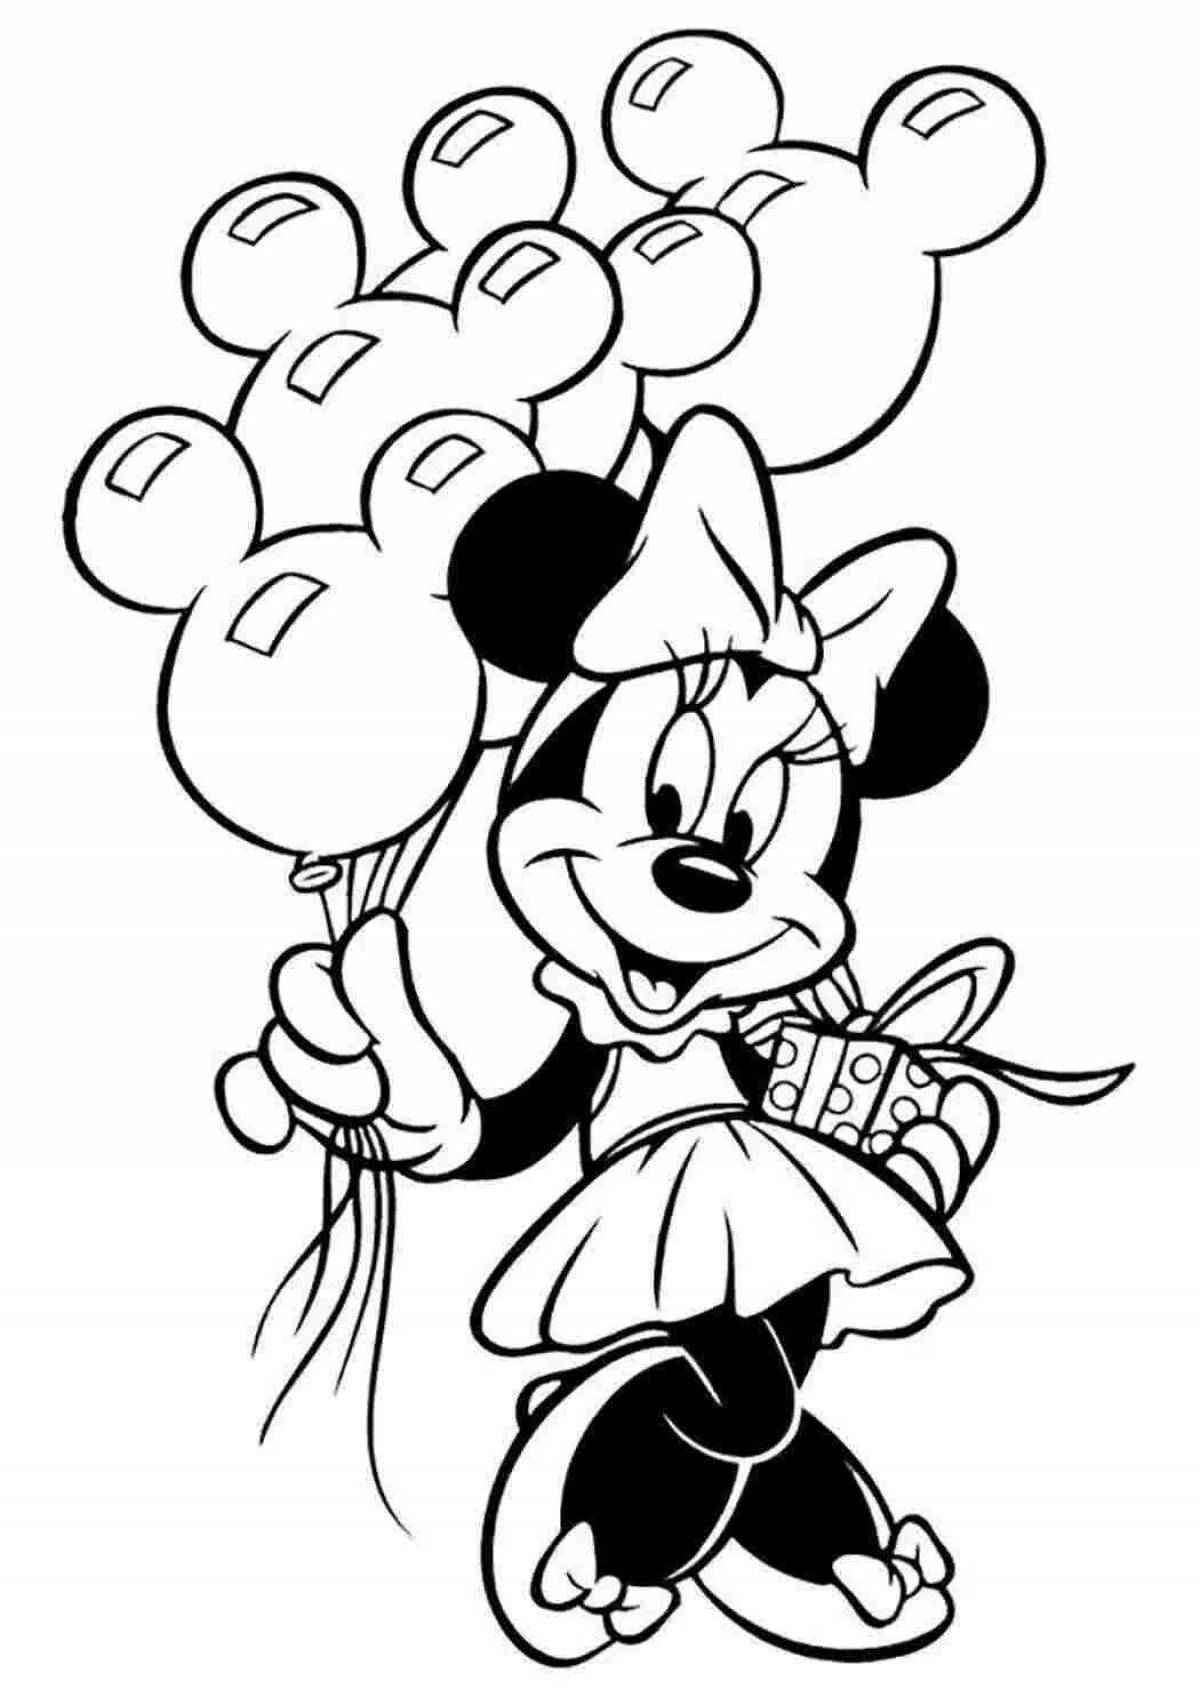 Minnie's adorable coloring page